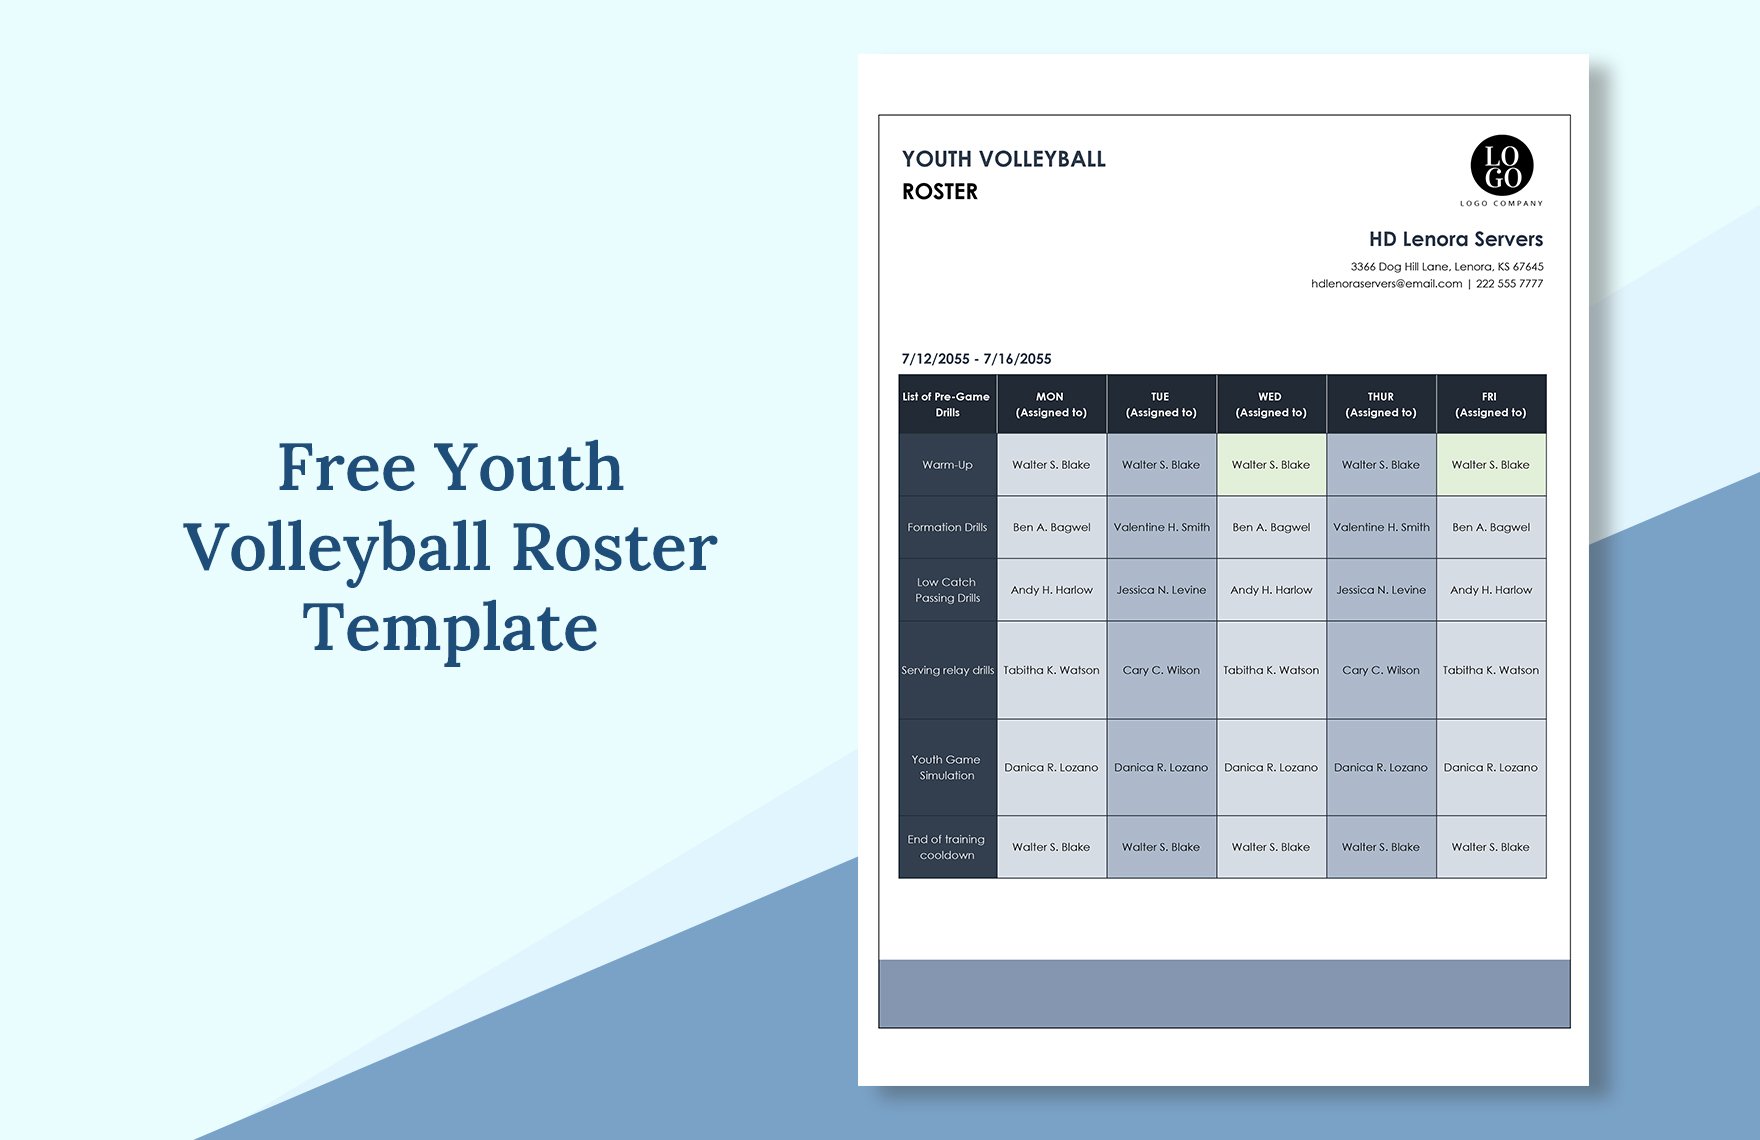    Youth Volleyball Roster Template